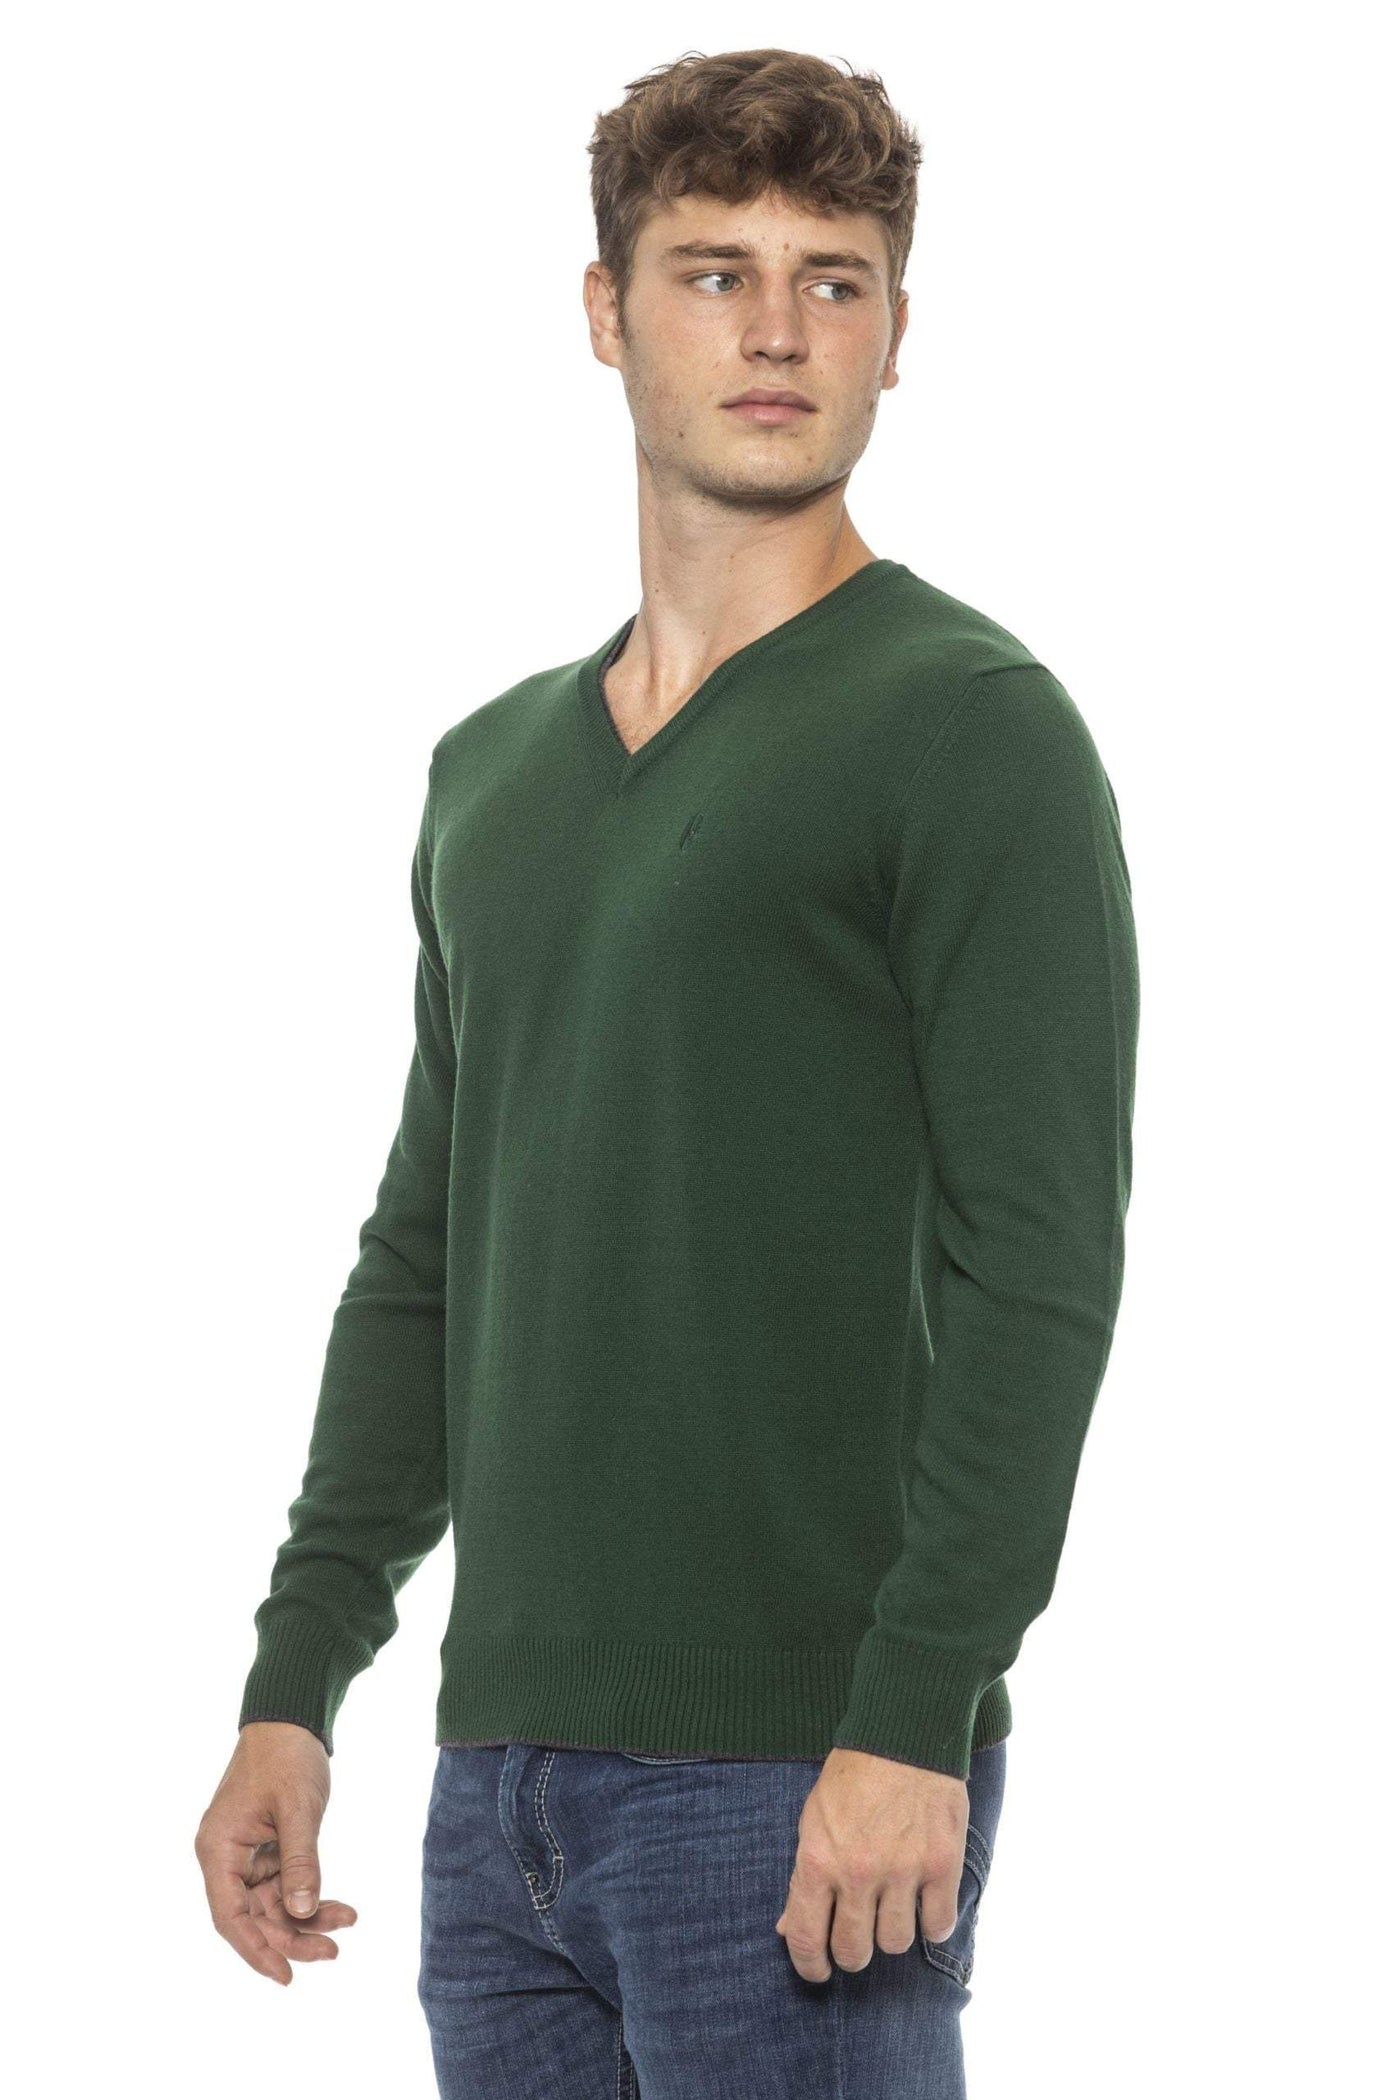 Conte of Florence v-neck Solid color Sweater #men, Conte of Florence, feed-agegroup-adult, feed-color-Green, feed-gender-male, Green, L, M, S, Sweaters - Men - Clothing, XL at SEYMAYKA